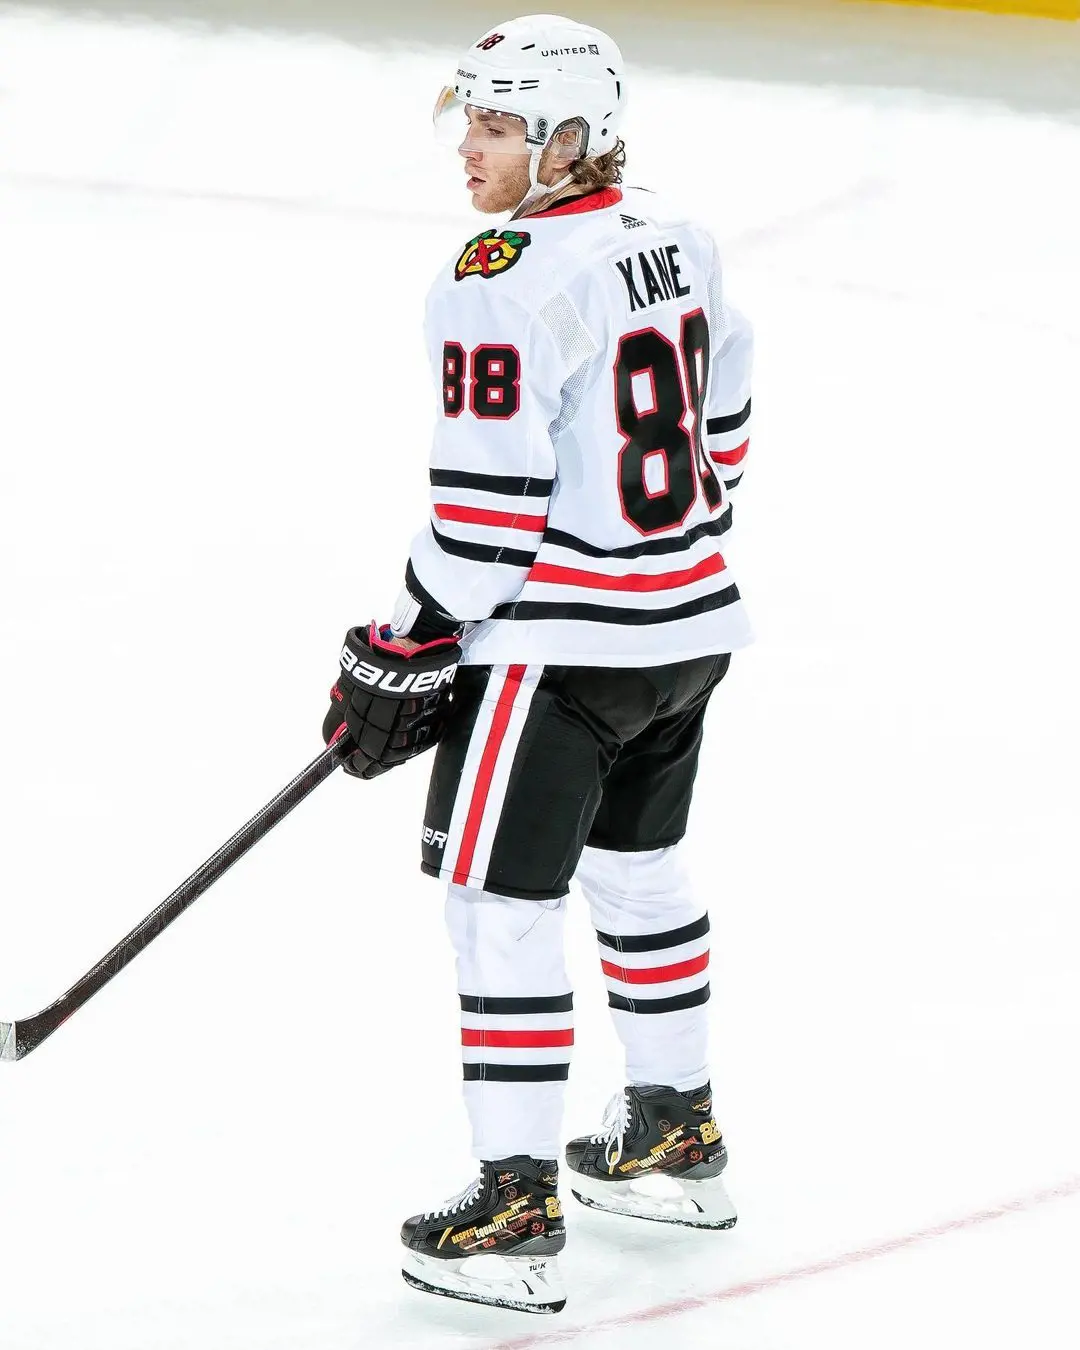 Patrick Kane is traded to the New York Rangers in 2023 after long career in his drafter the Blackhawks.